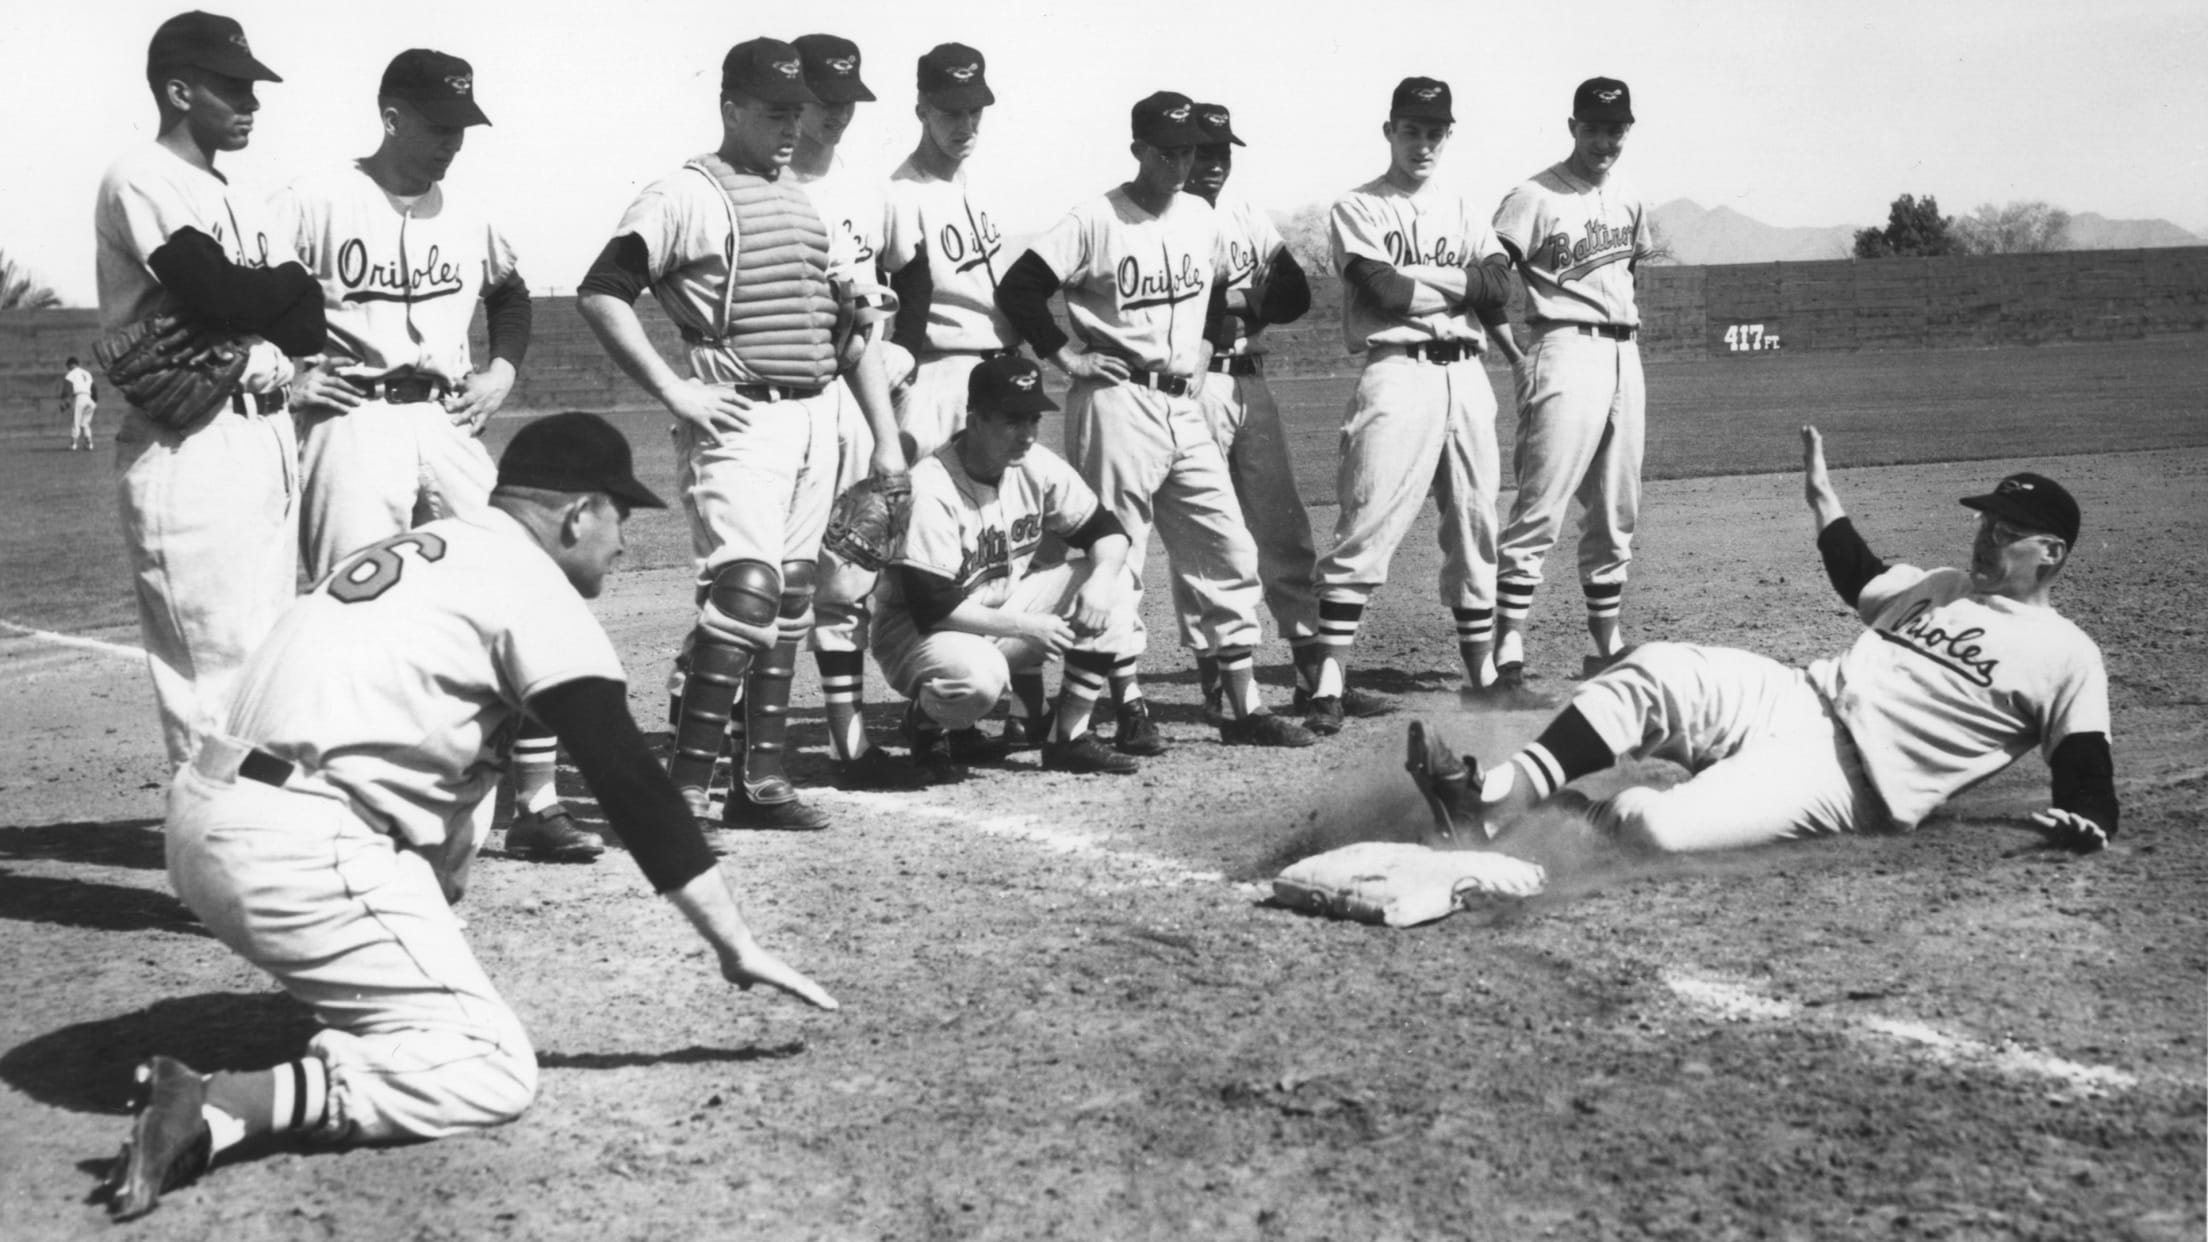 In 1954, Orioles found their oasis during spring training